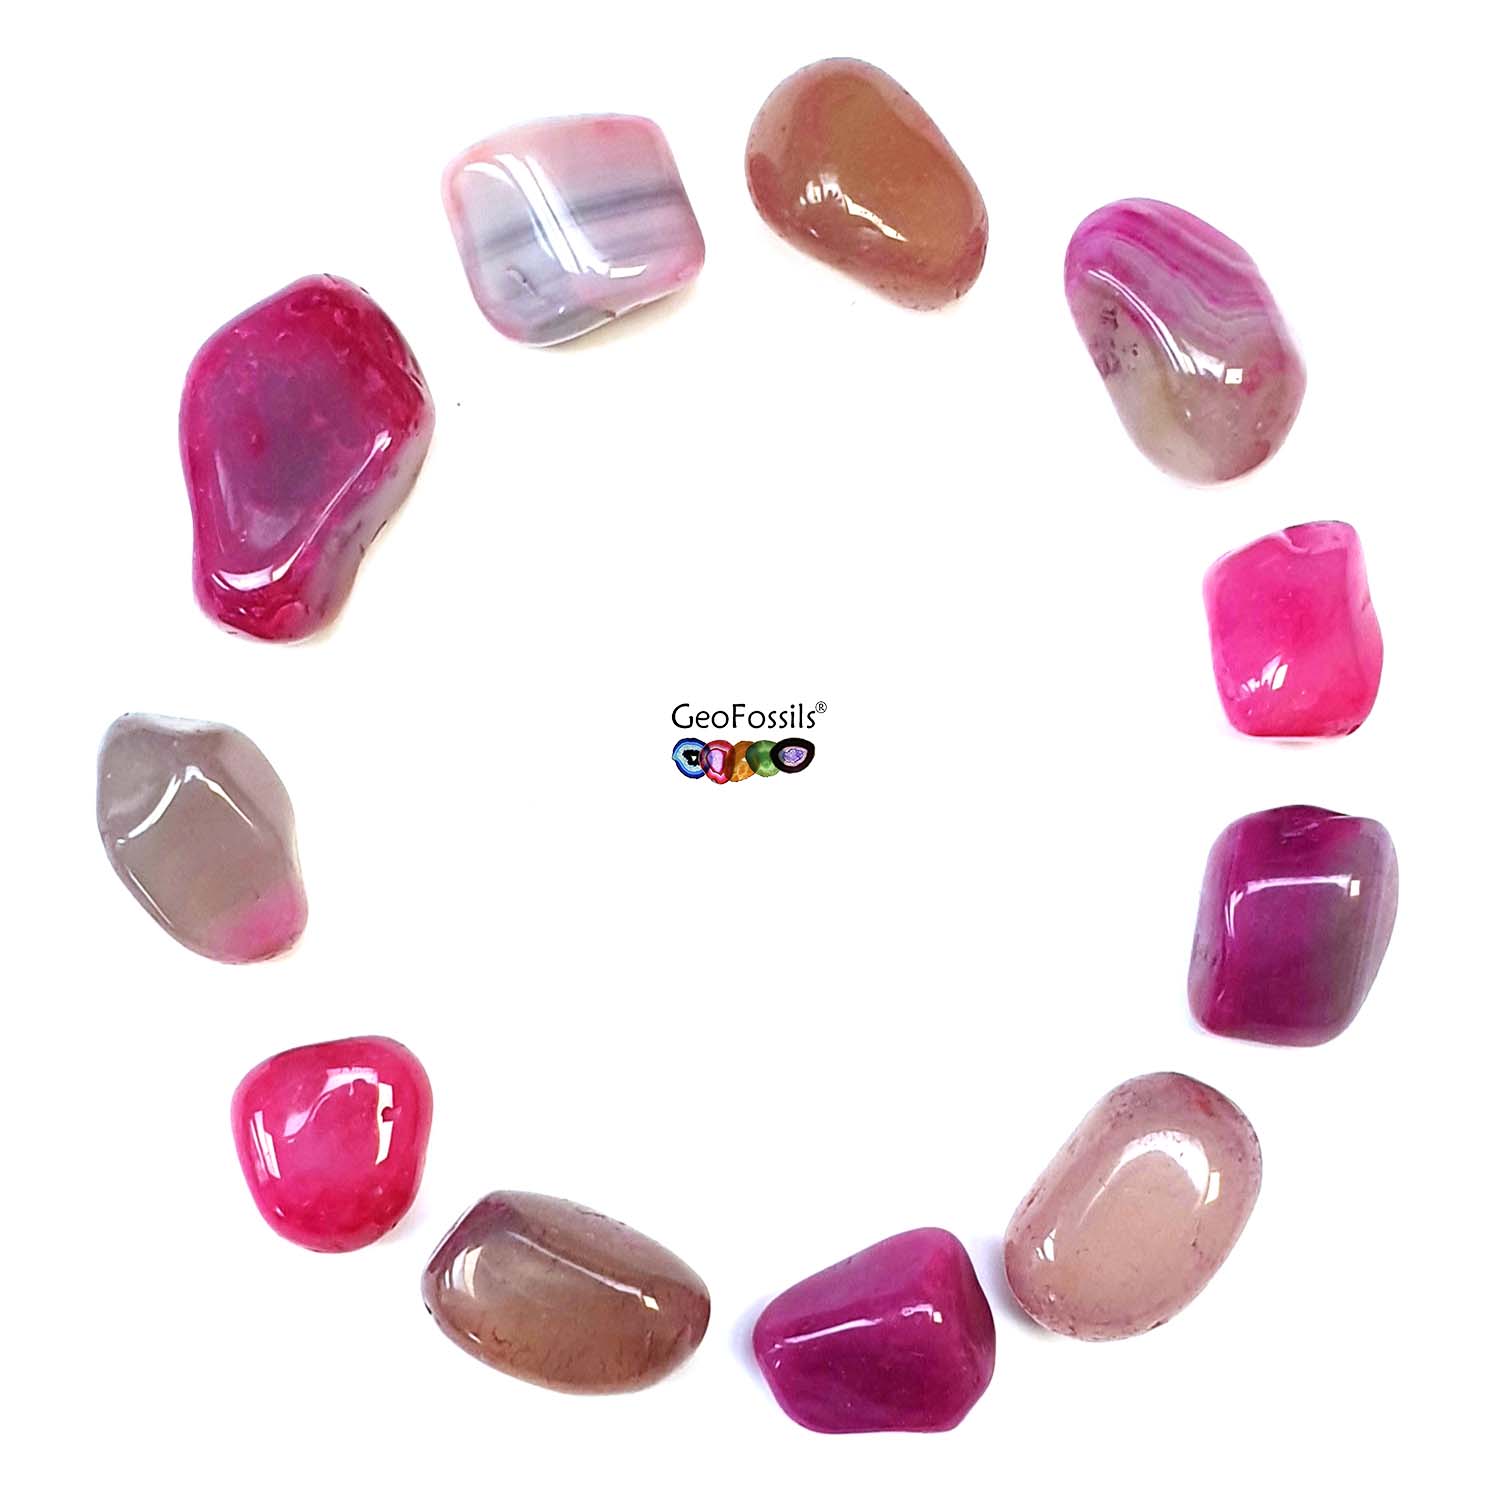 GeoFossils Dyed Pink Agate Polished Tumbled Stones